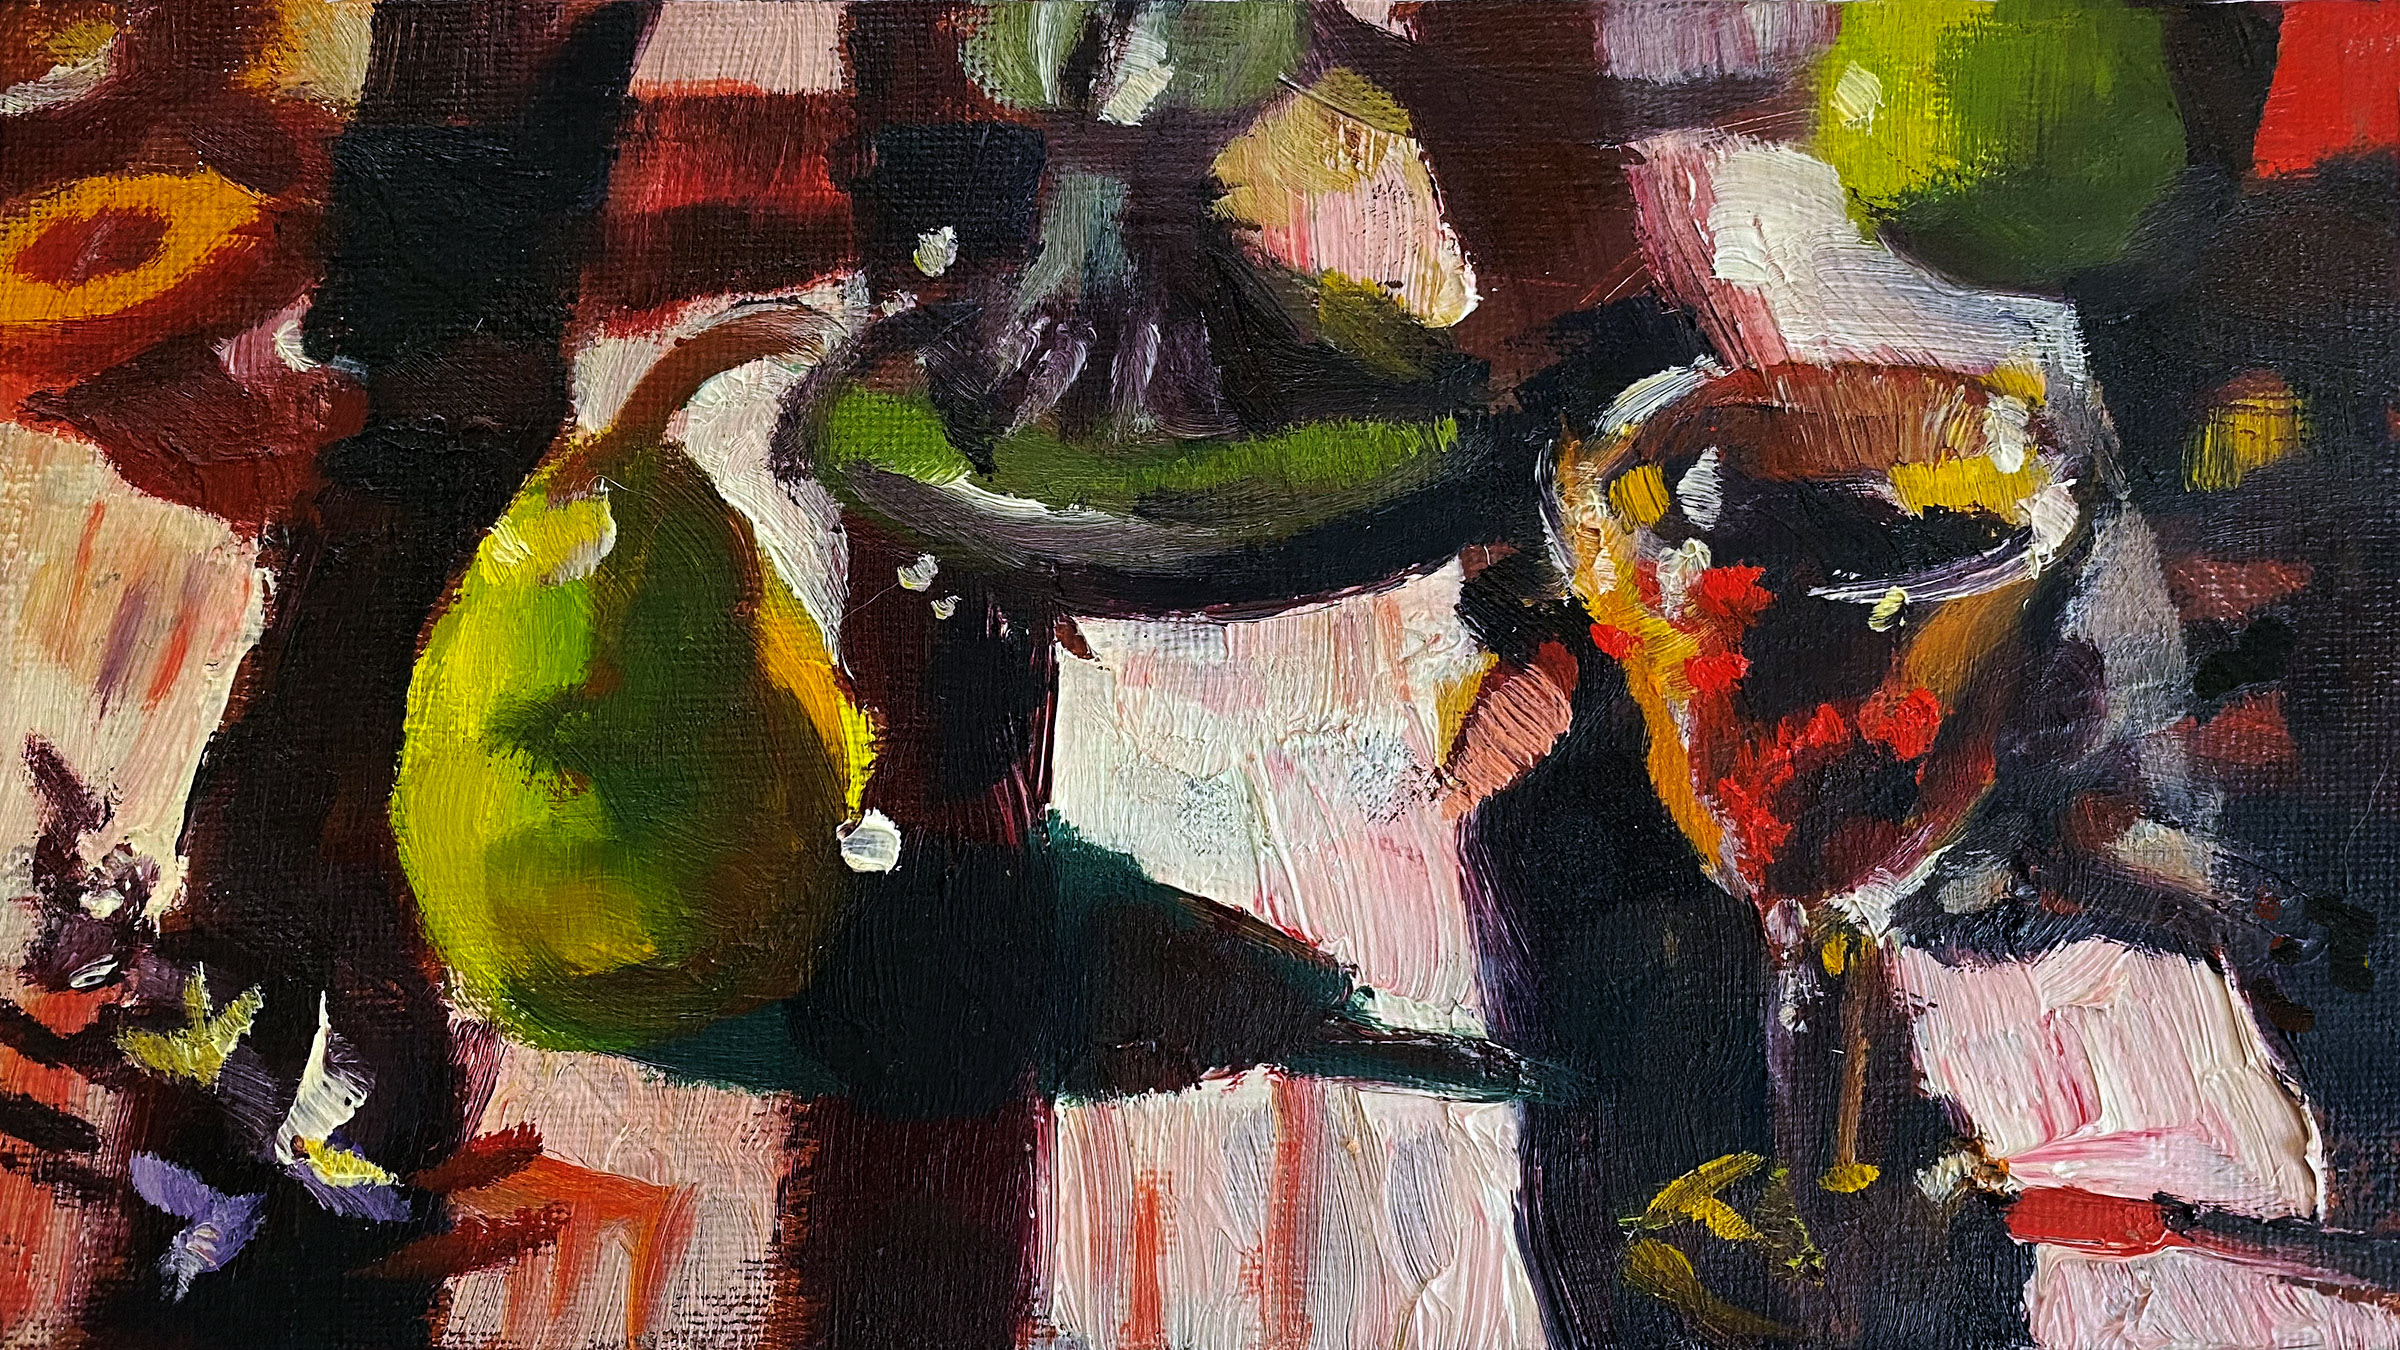 Valadon 'Pear and Wine' oil on canvas 23 x 13cm